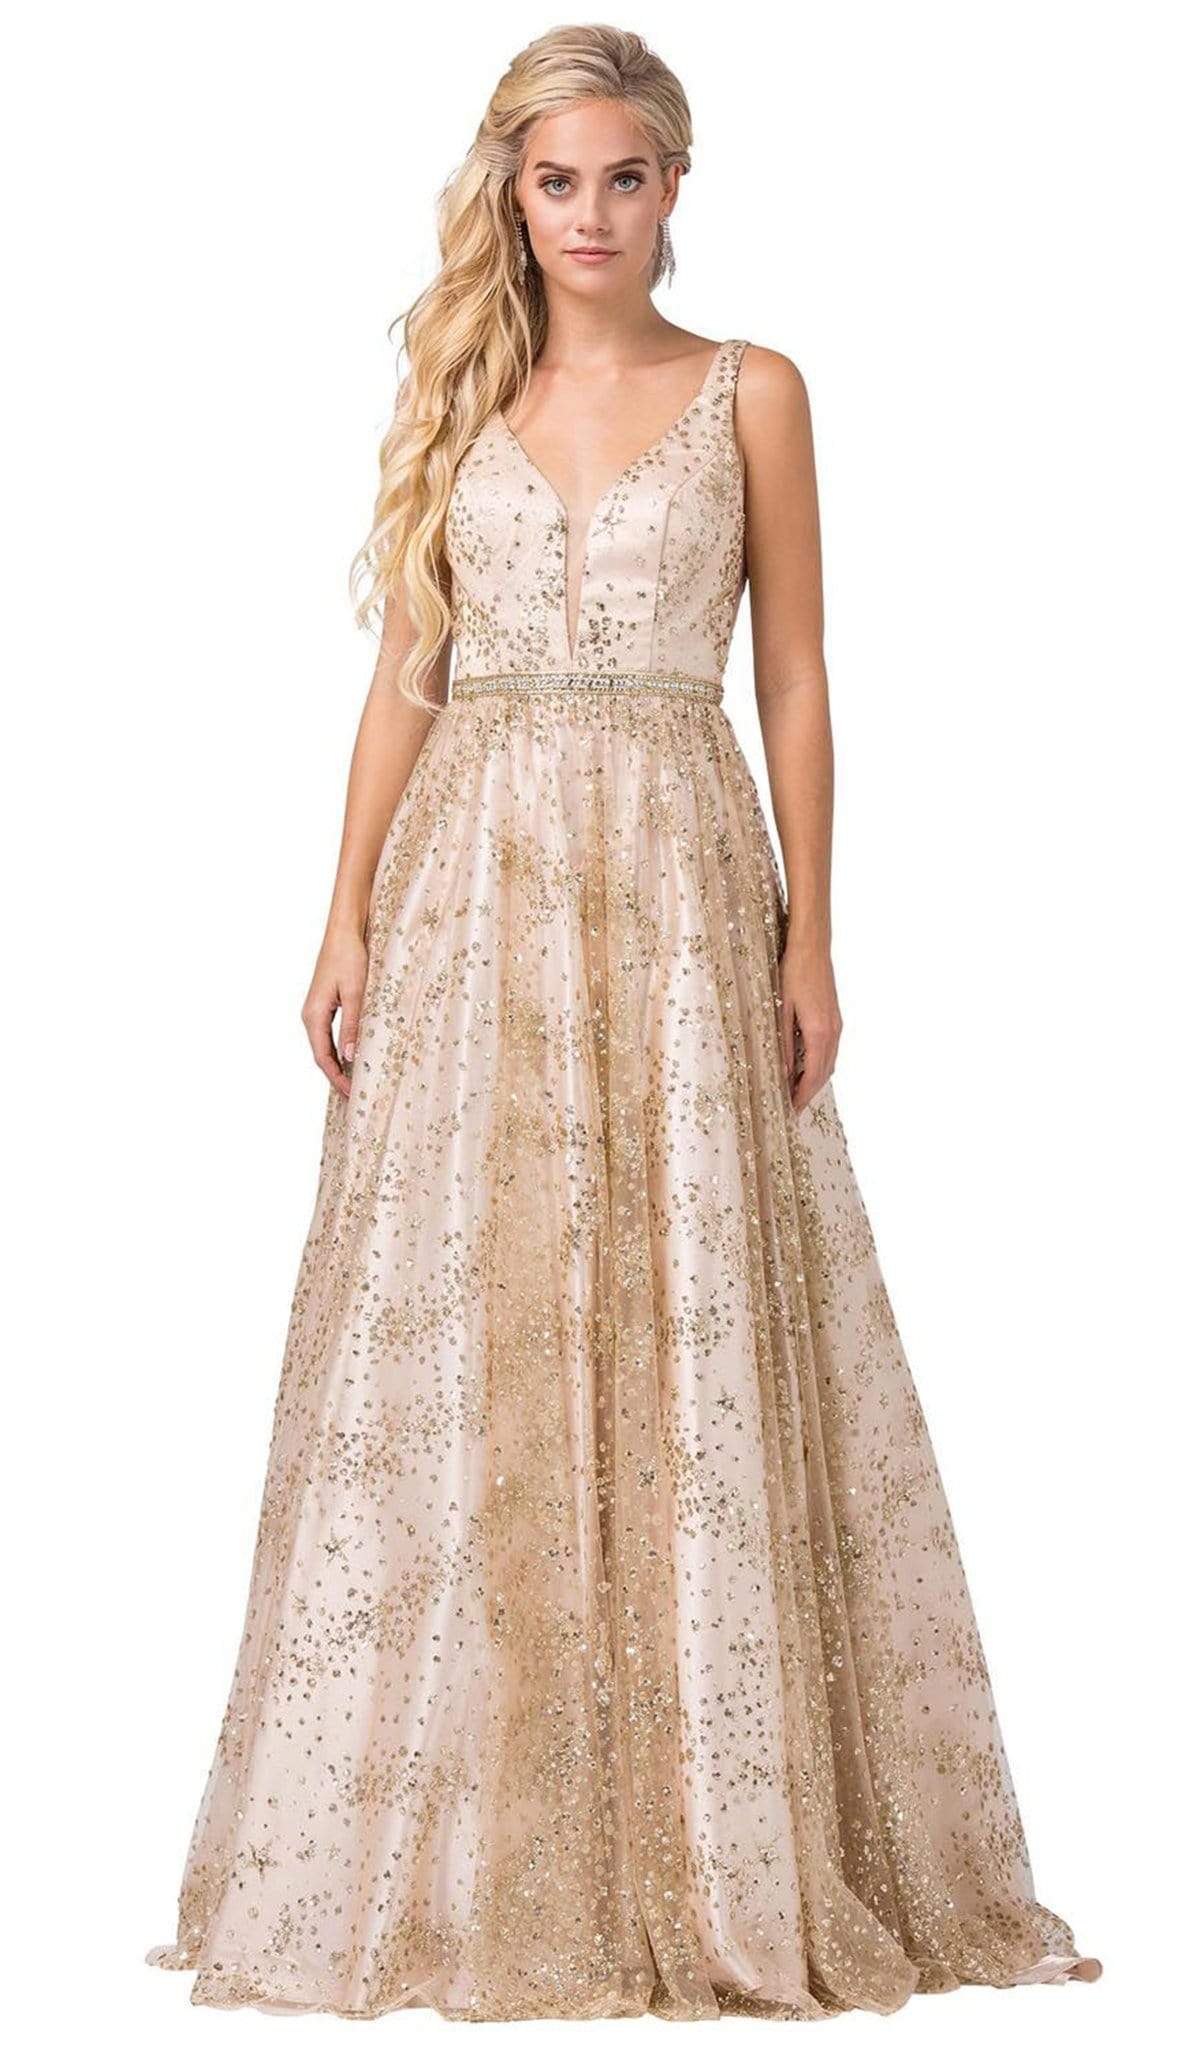 Dancing Queen - Glitter Embellished A-line Gown 2650SC In Gold